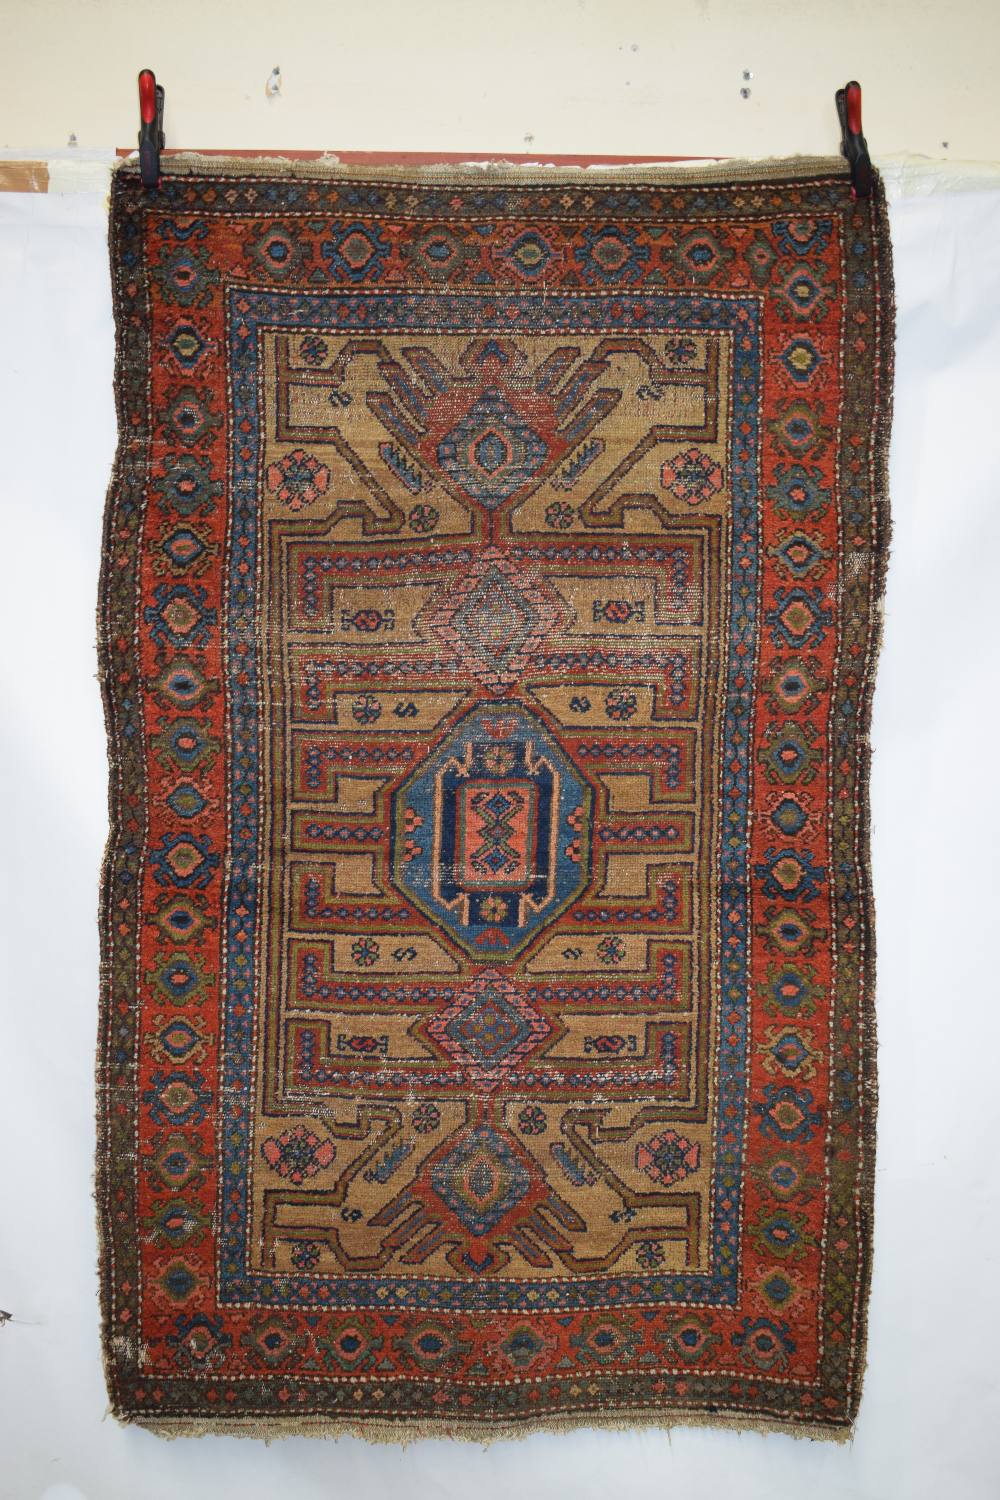 Kurdish rug, north west Persia, early 20th century, 6ft. 5in. x 3ft. 11in. 1.96m. x 1.20m. Overall - Image 2 of 11